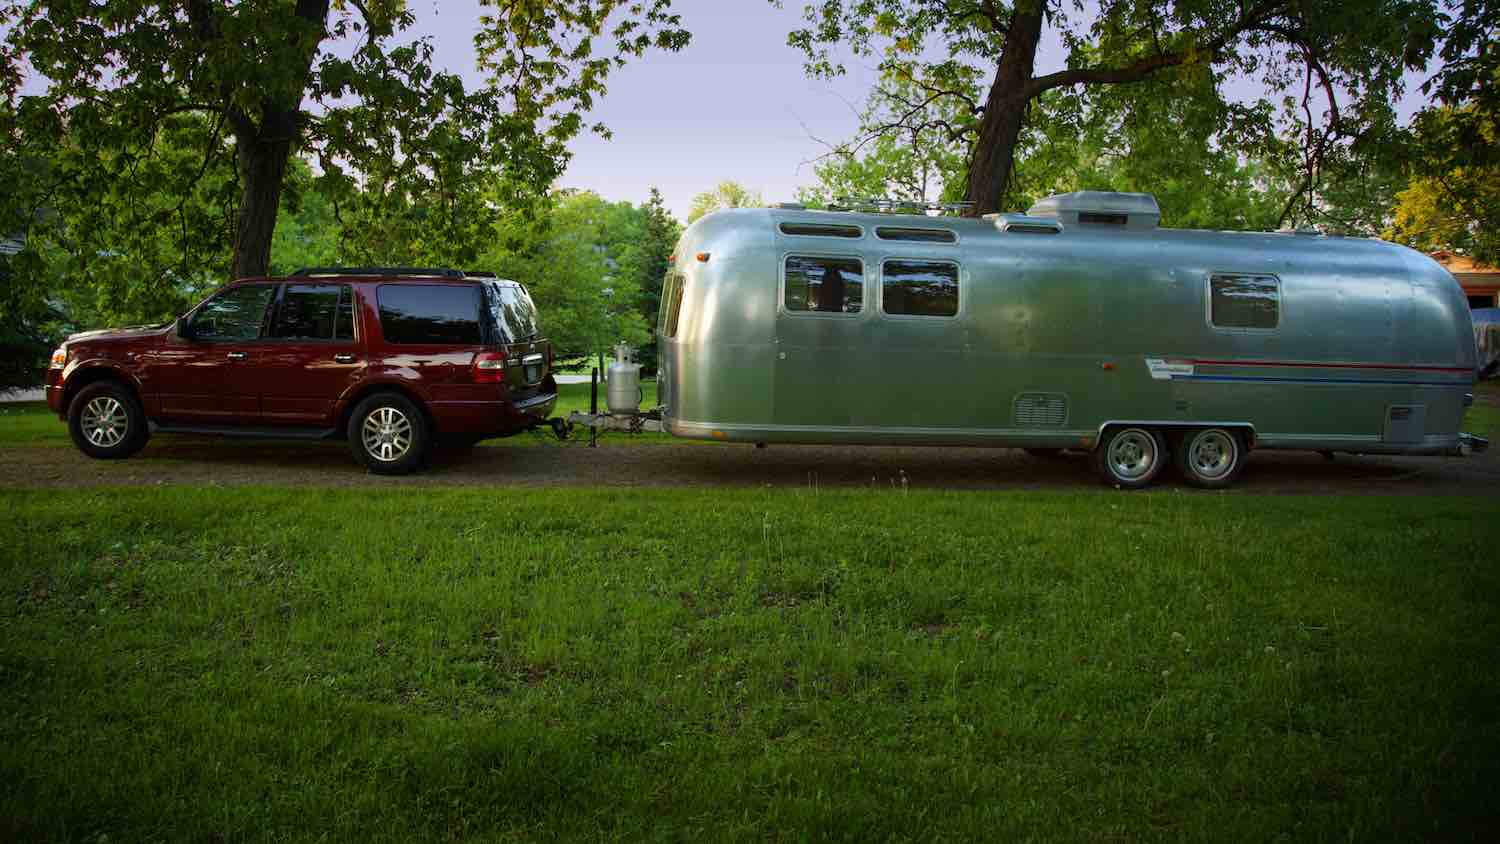 Time to camp with our Land Yacht Airstream Travel Trailer.